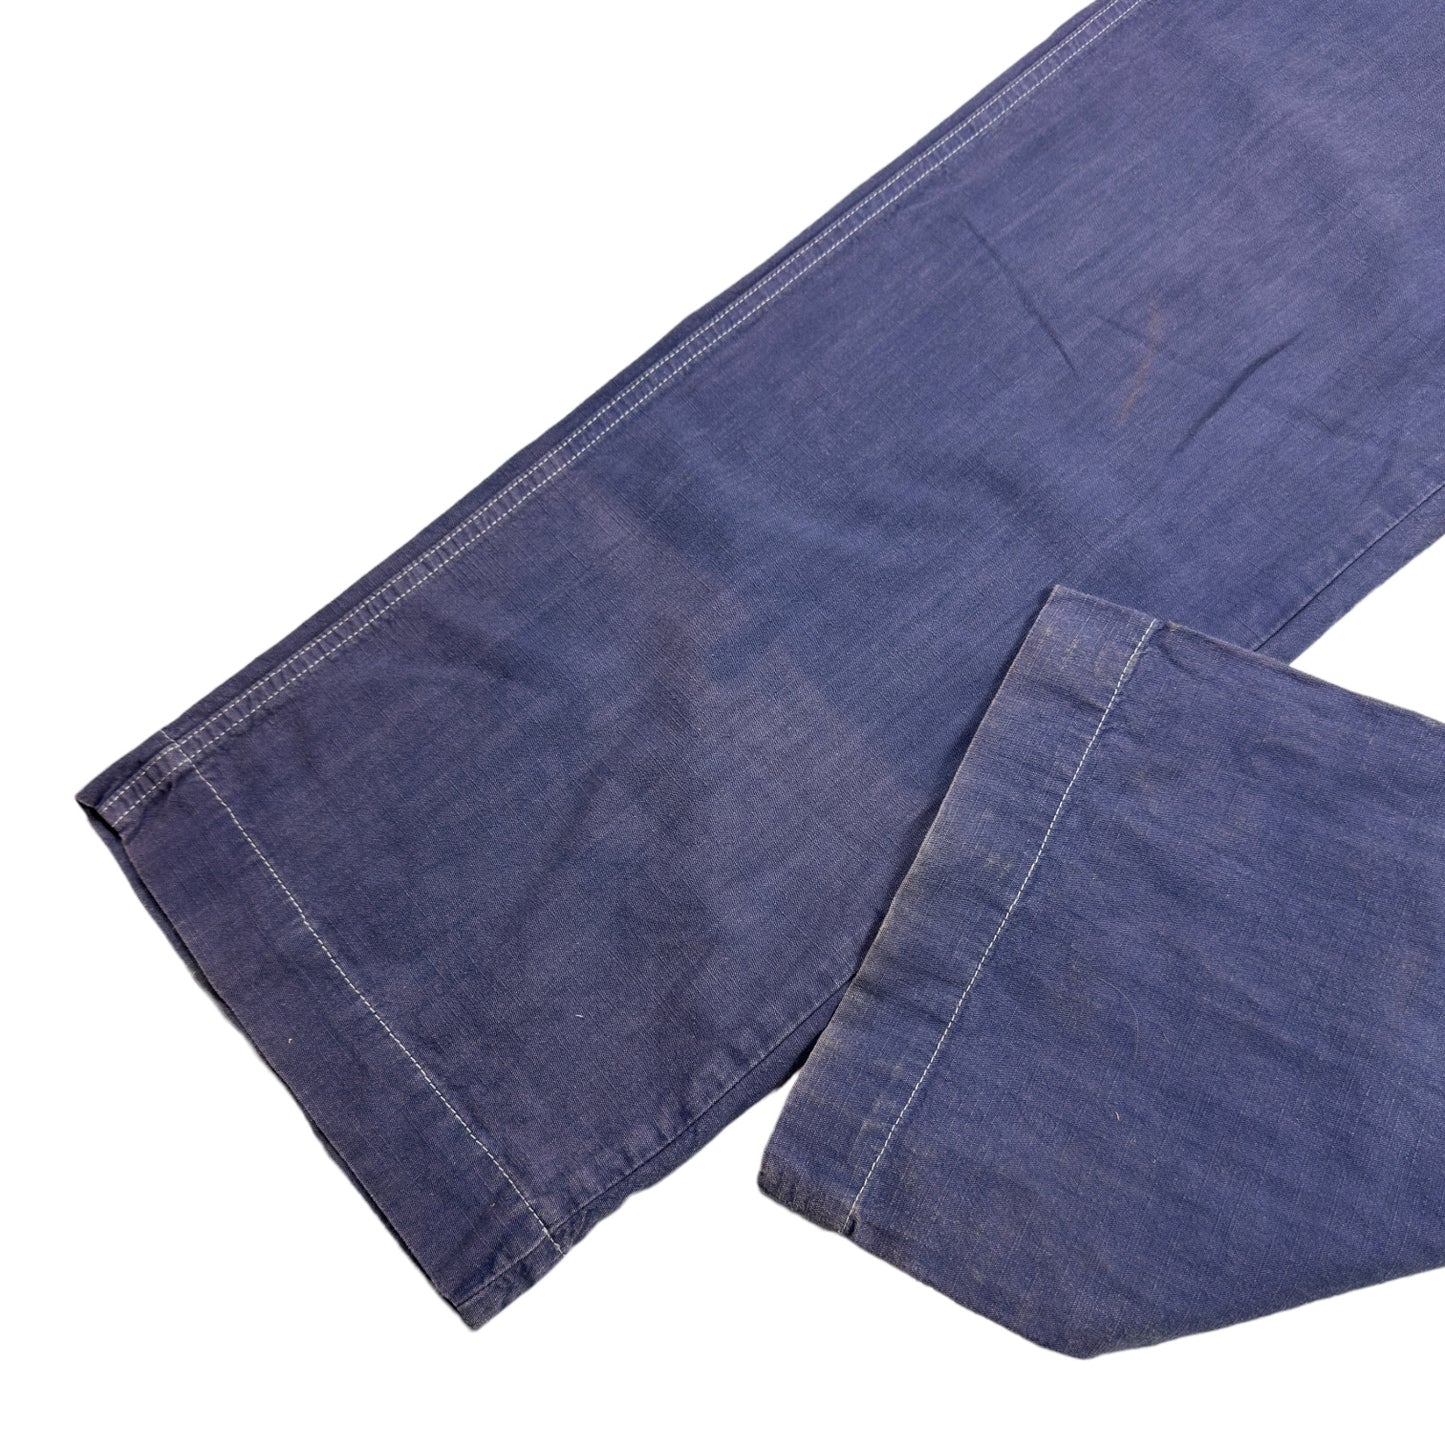 Armani Jeans Workwear Style Blue Trousers